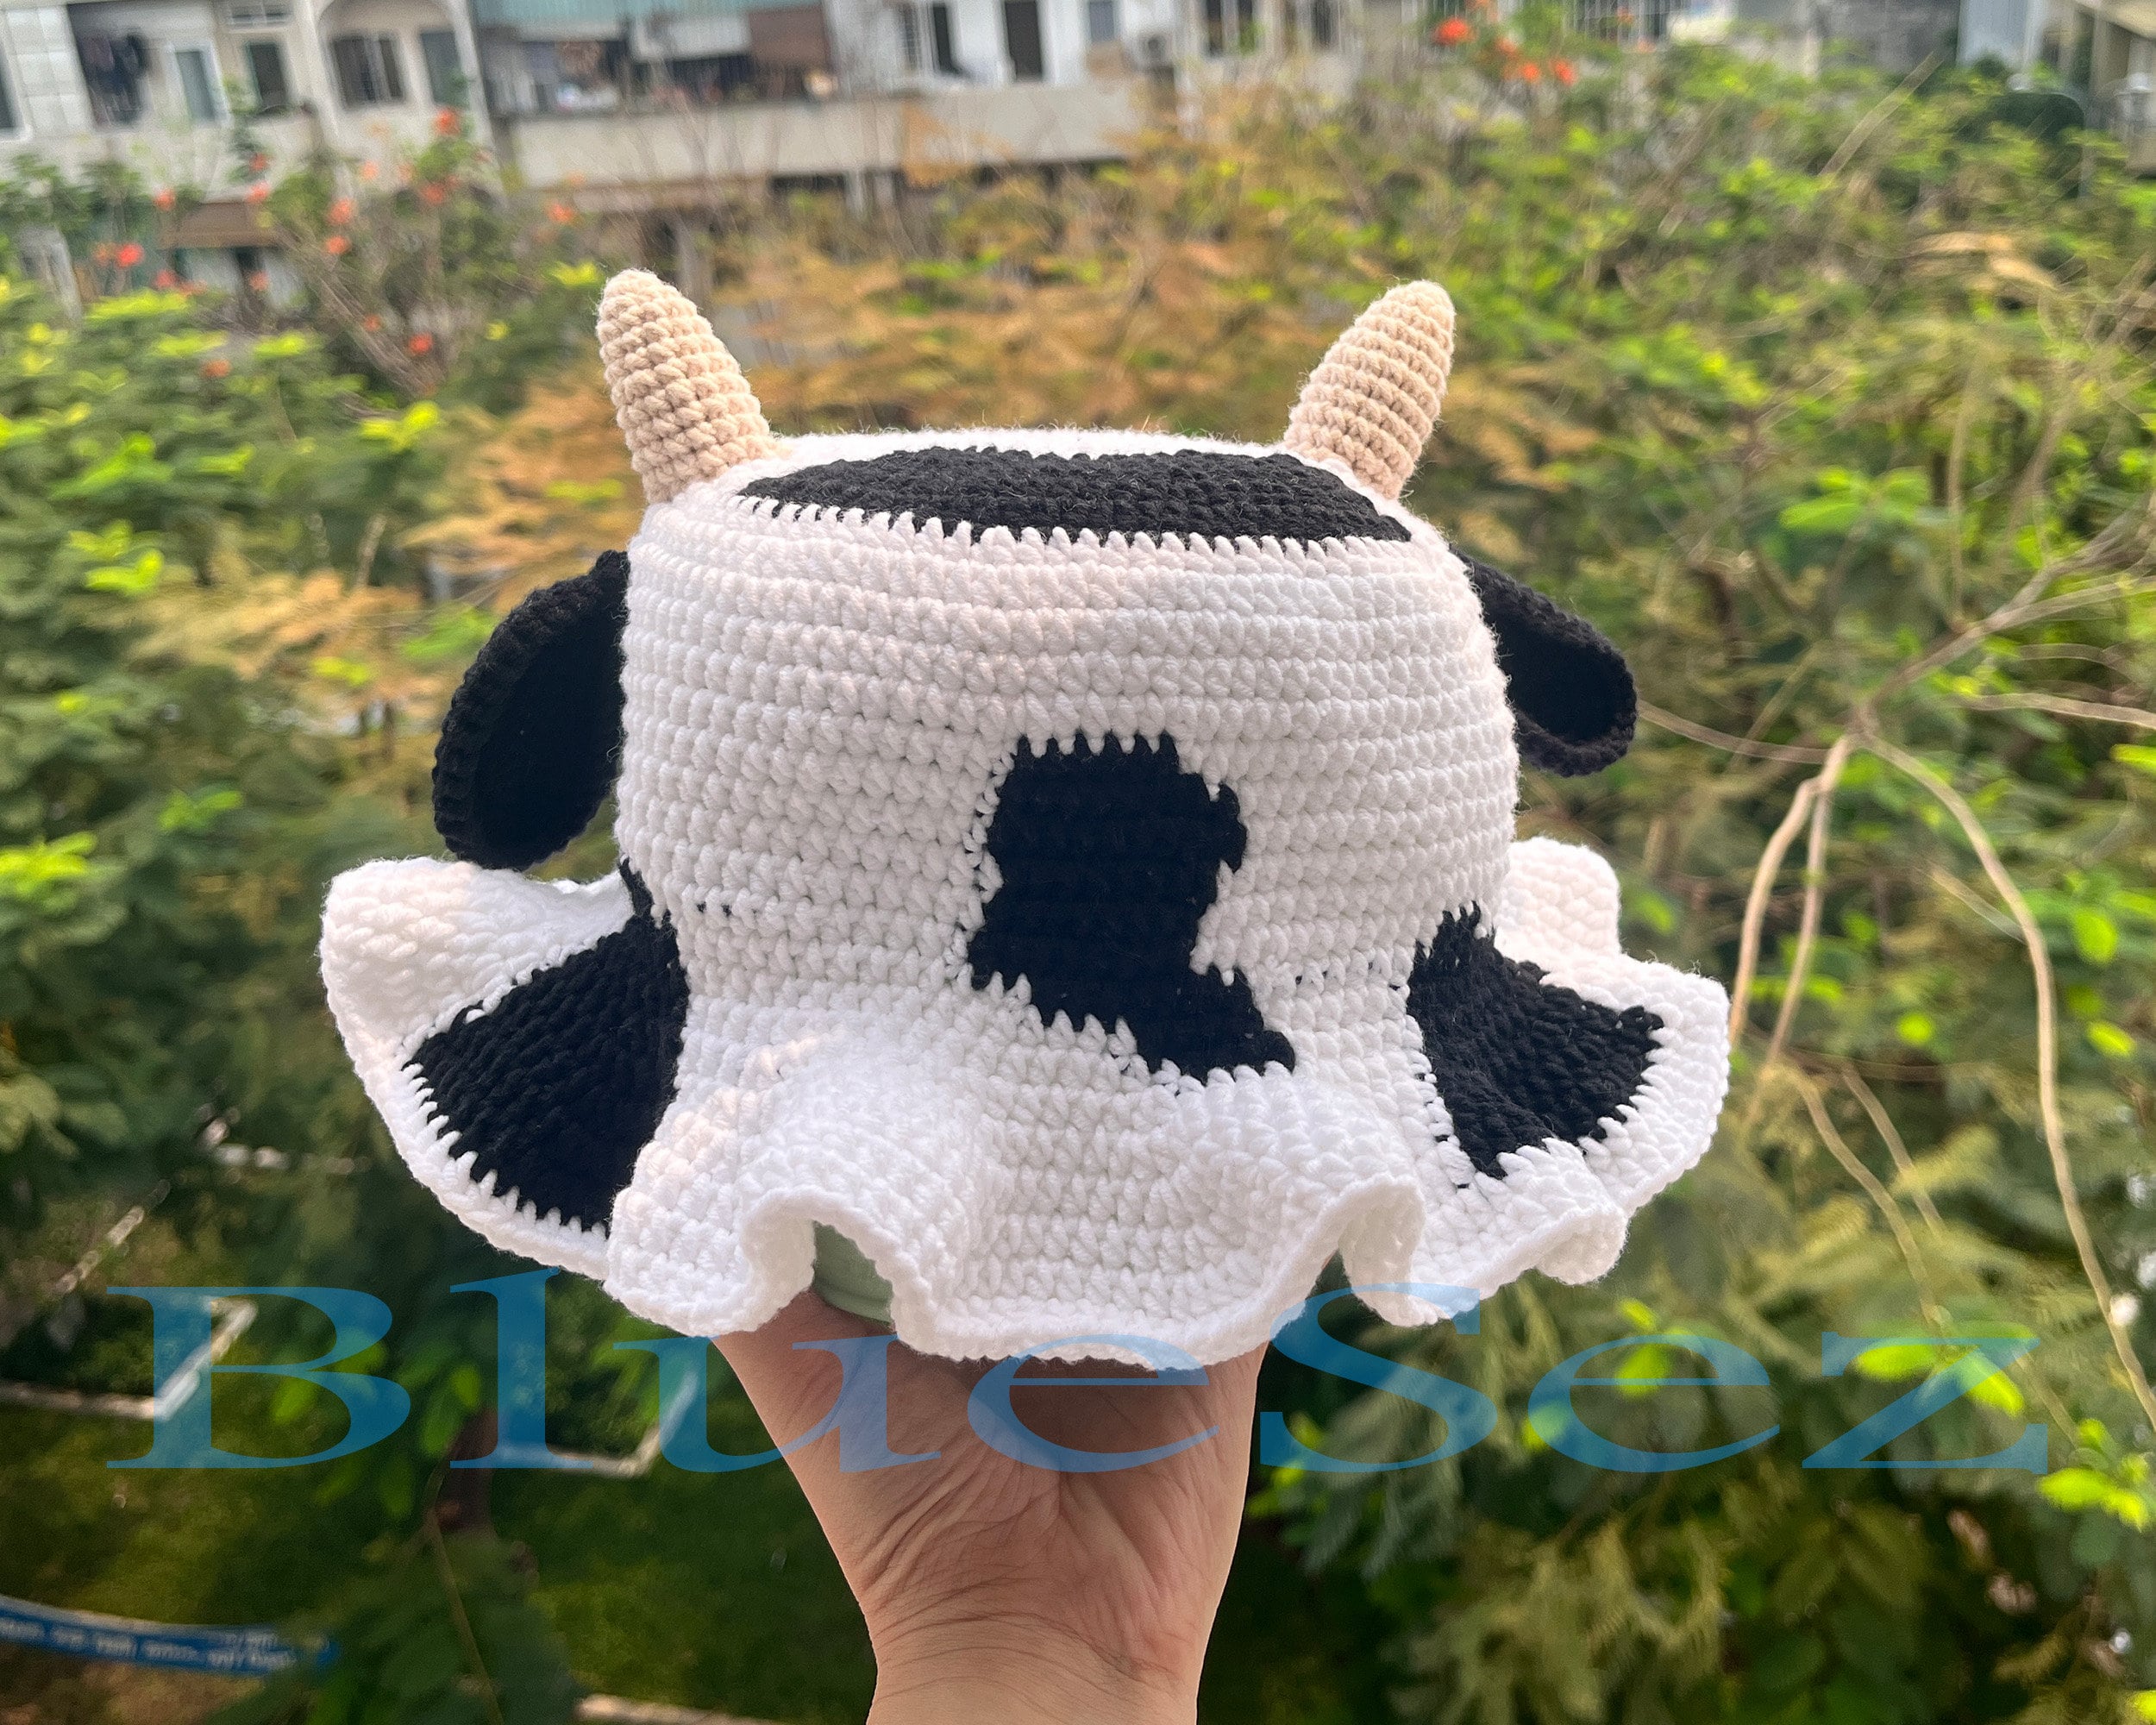 Check out this cow bucket hat I made for my friend 💓 I freehanded